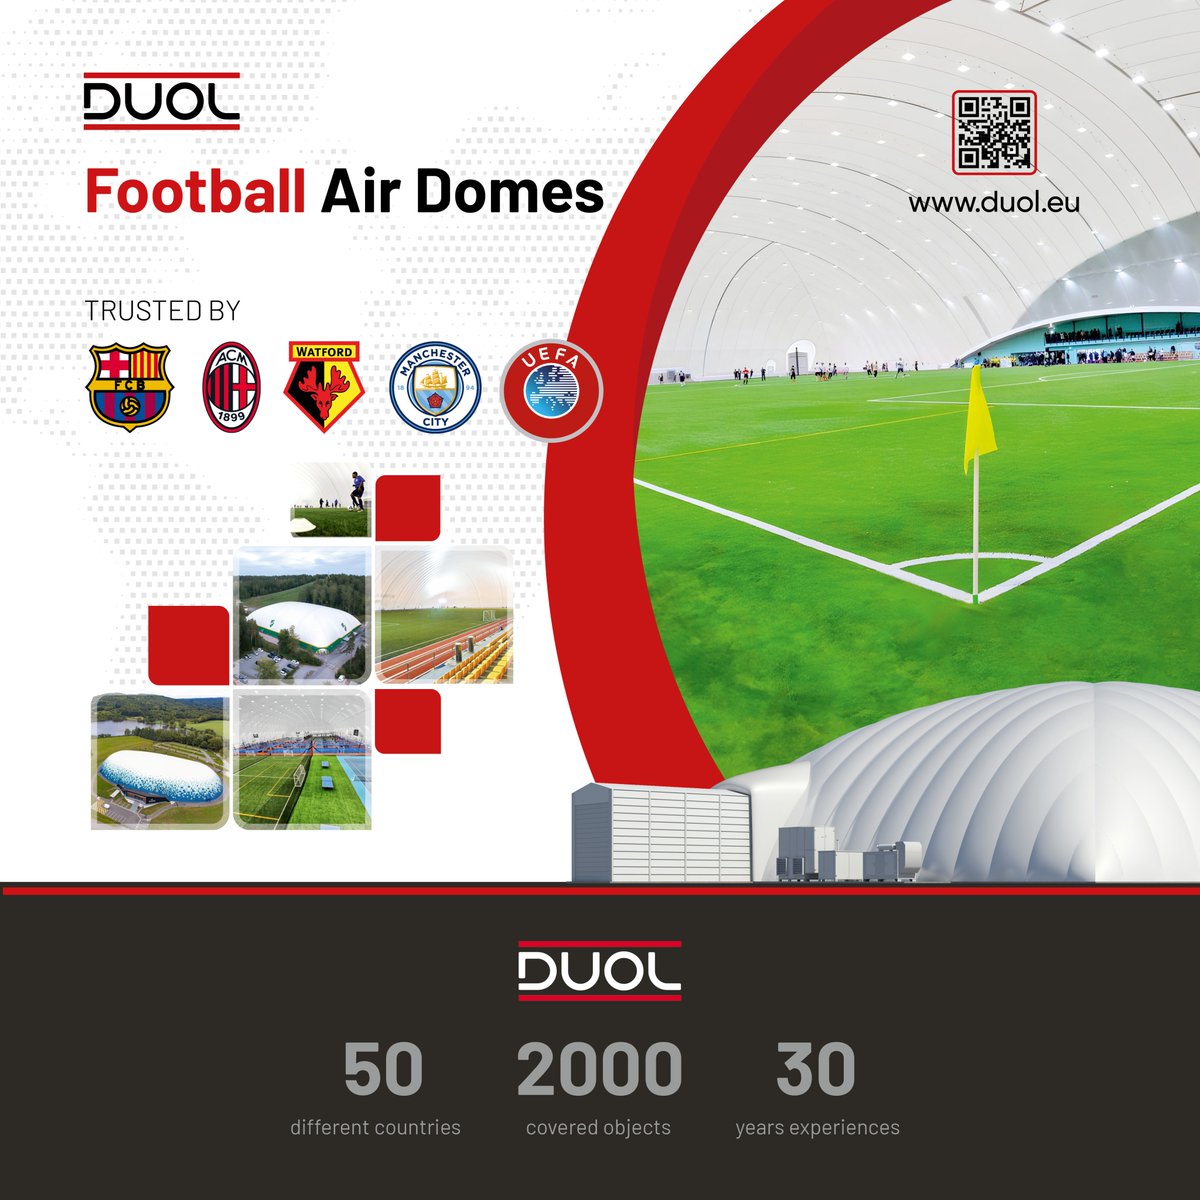 We are excited to announce that @duolduol the leading football airdome company, will be joining #soccerexeurope as an Exhibitor, this May 30-31st at the iconic @cruijffarena ⚽️💥🇳🇱